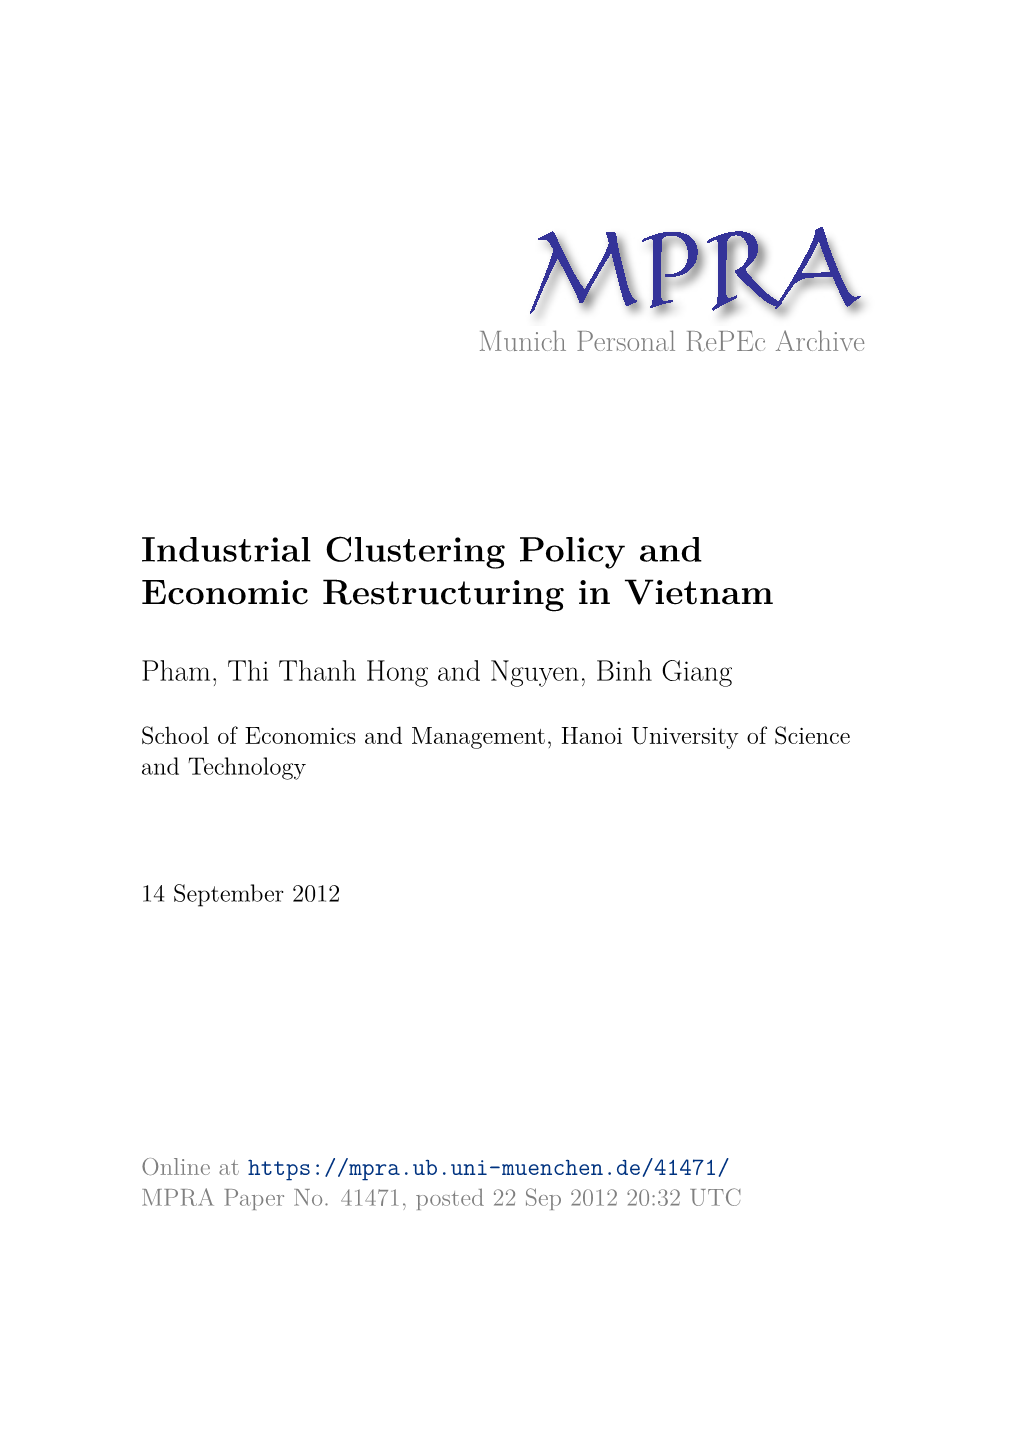 Industrial Clustering Policy and Economic Restructuring in Vietnam